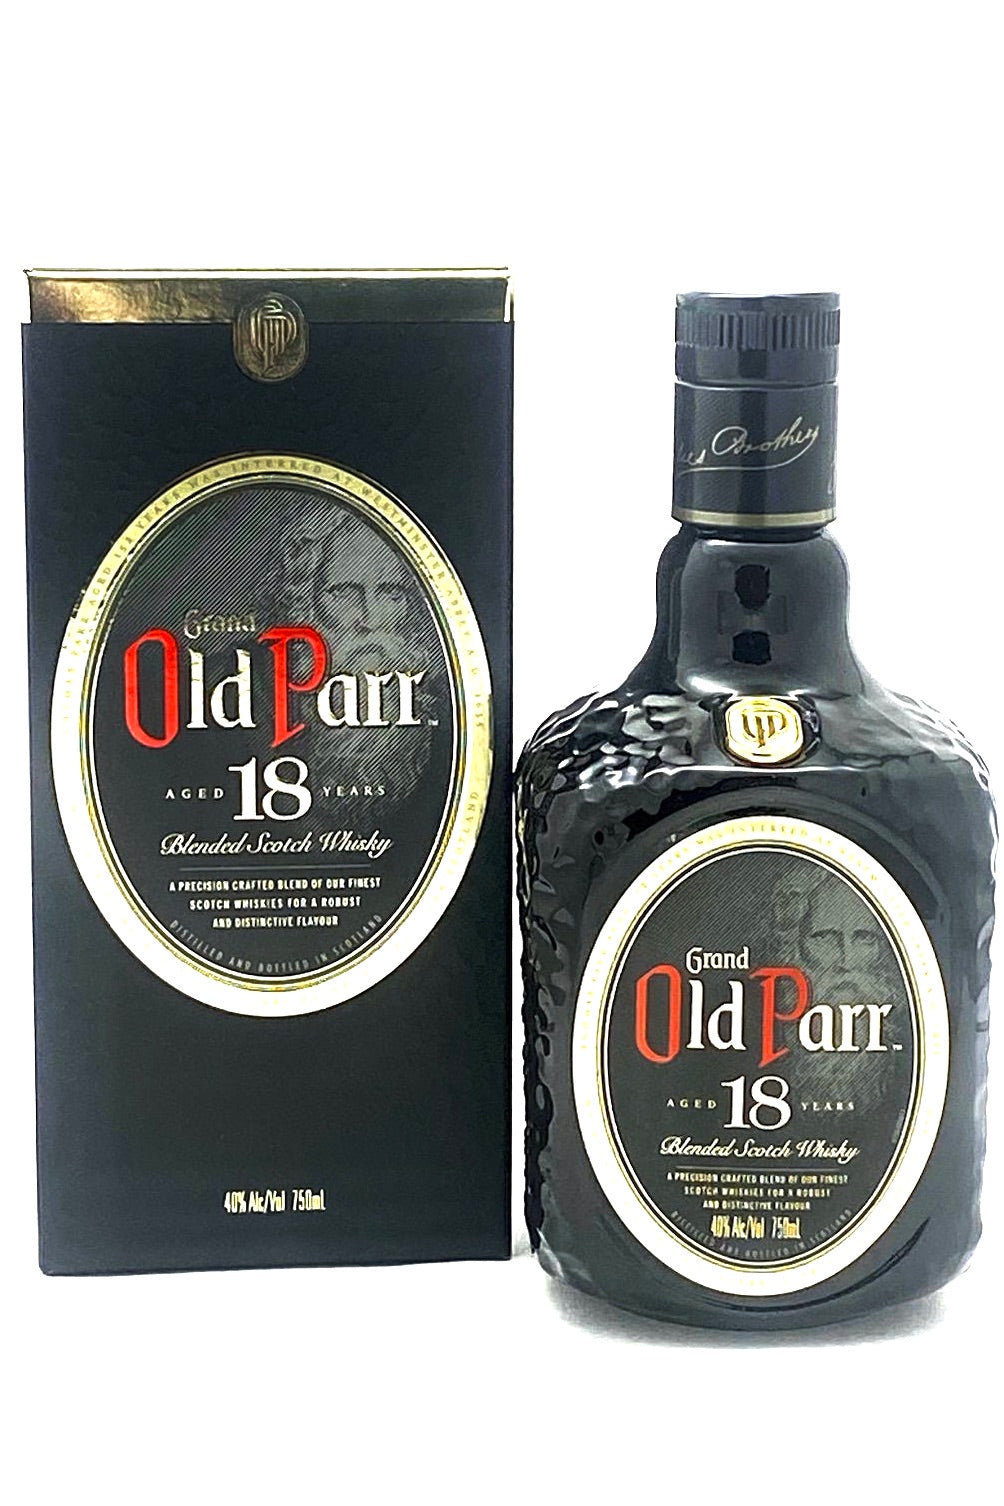 Grand Old Parr Aged 18 Years Blended Scotch Whisky